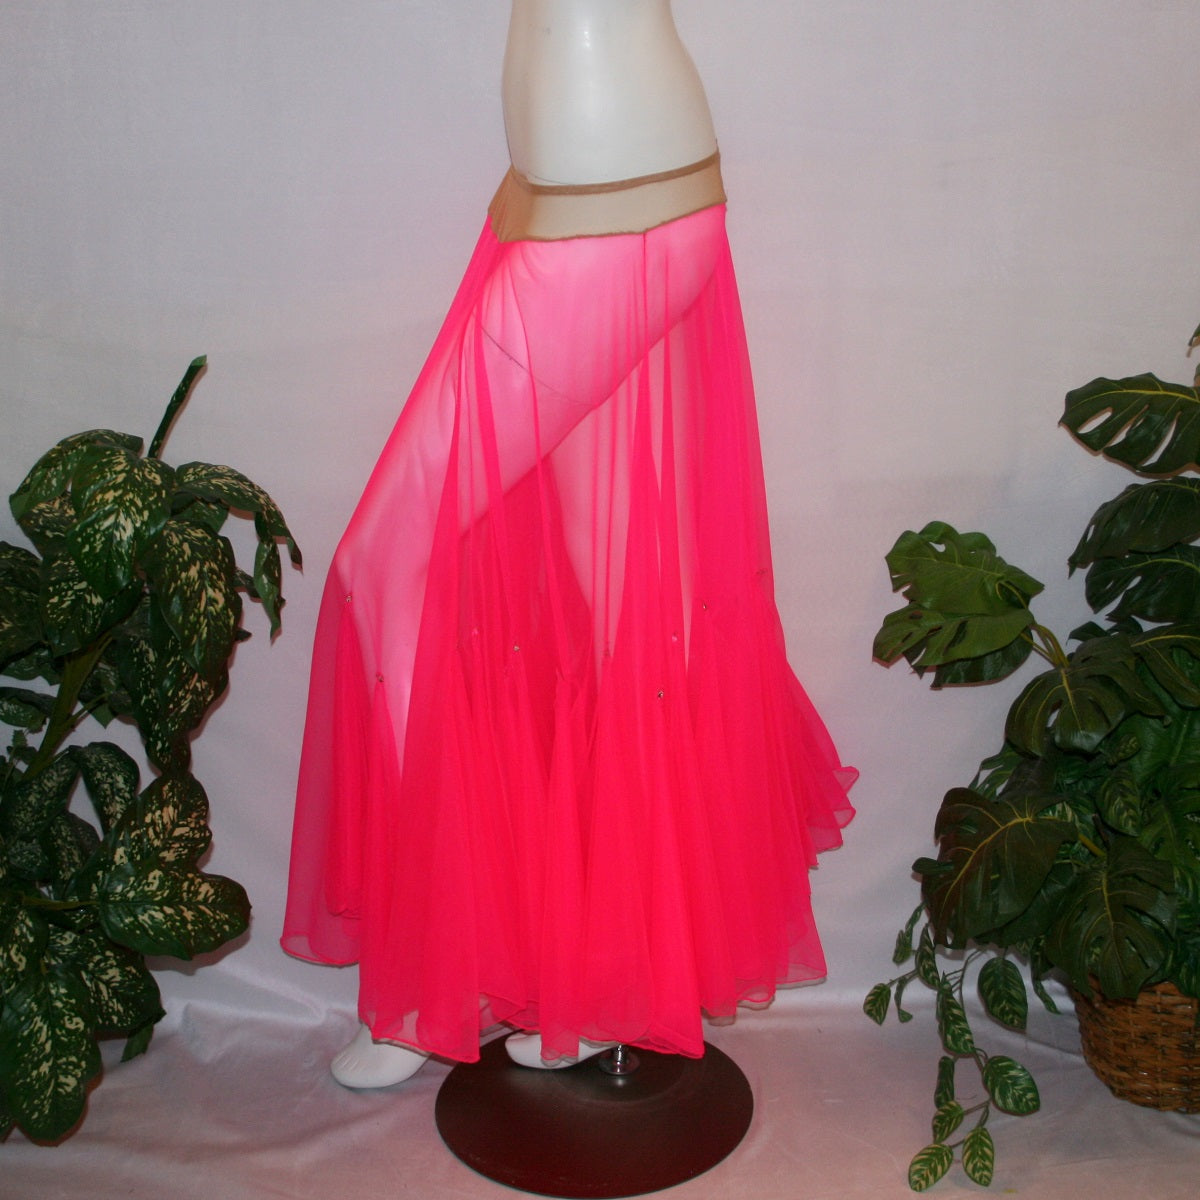 side view of Hot pink ballroom skirt created with yards of hot pink sheer tricot with petal like floats around bottom embellished with tear drop Swarovski rhinestones.